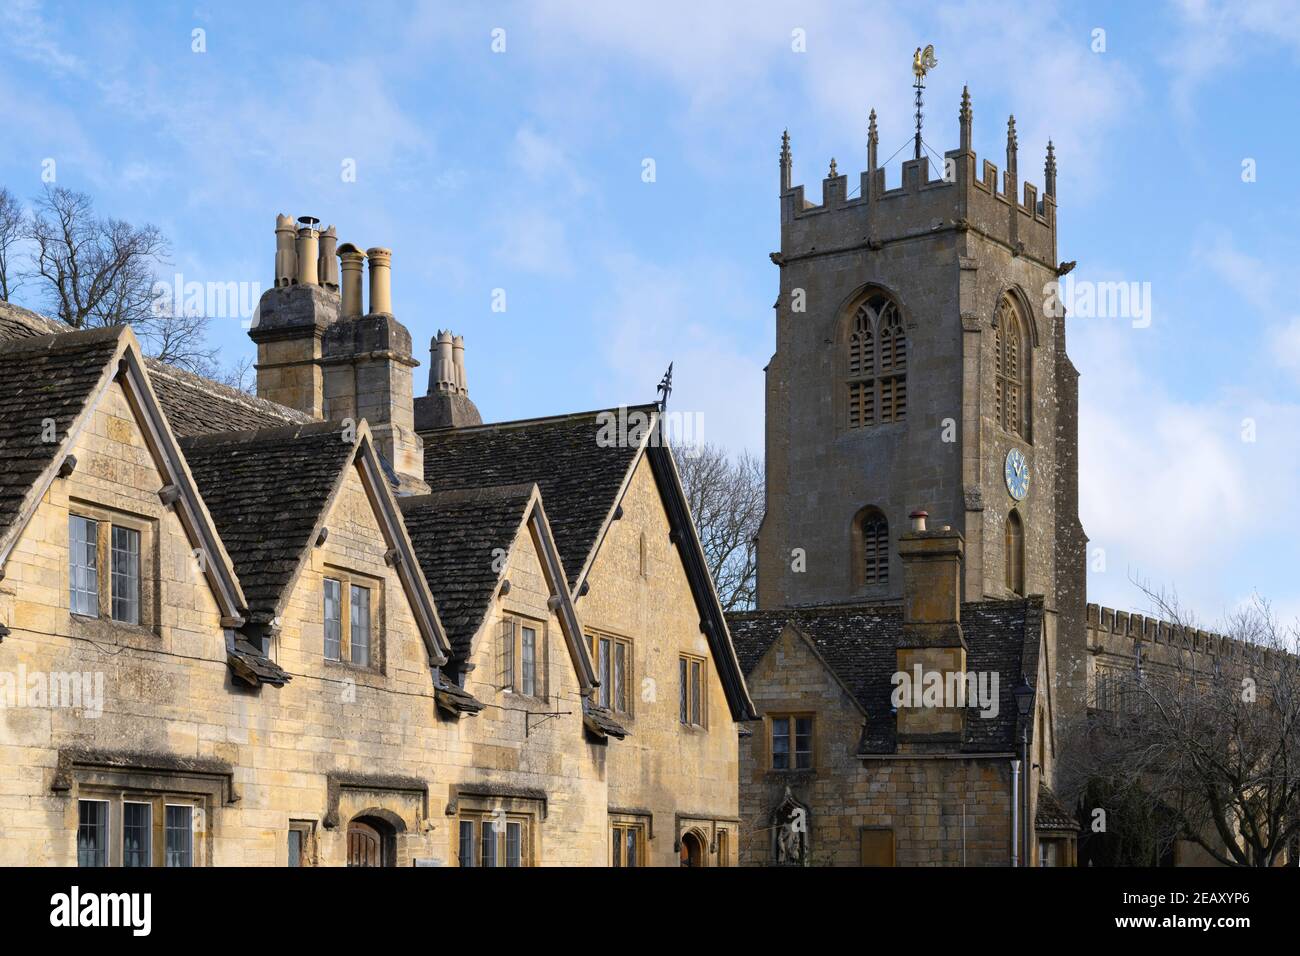 Église Winchcombe, Cotswolds, Gloucestershire, Angleterre. Banque D'Images